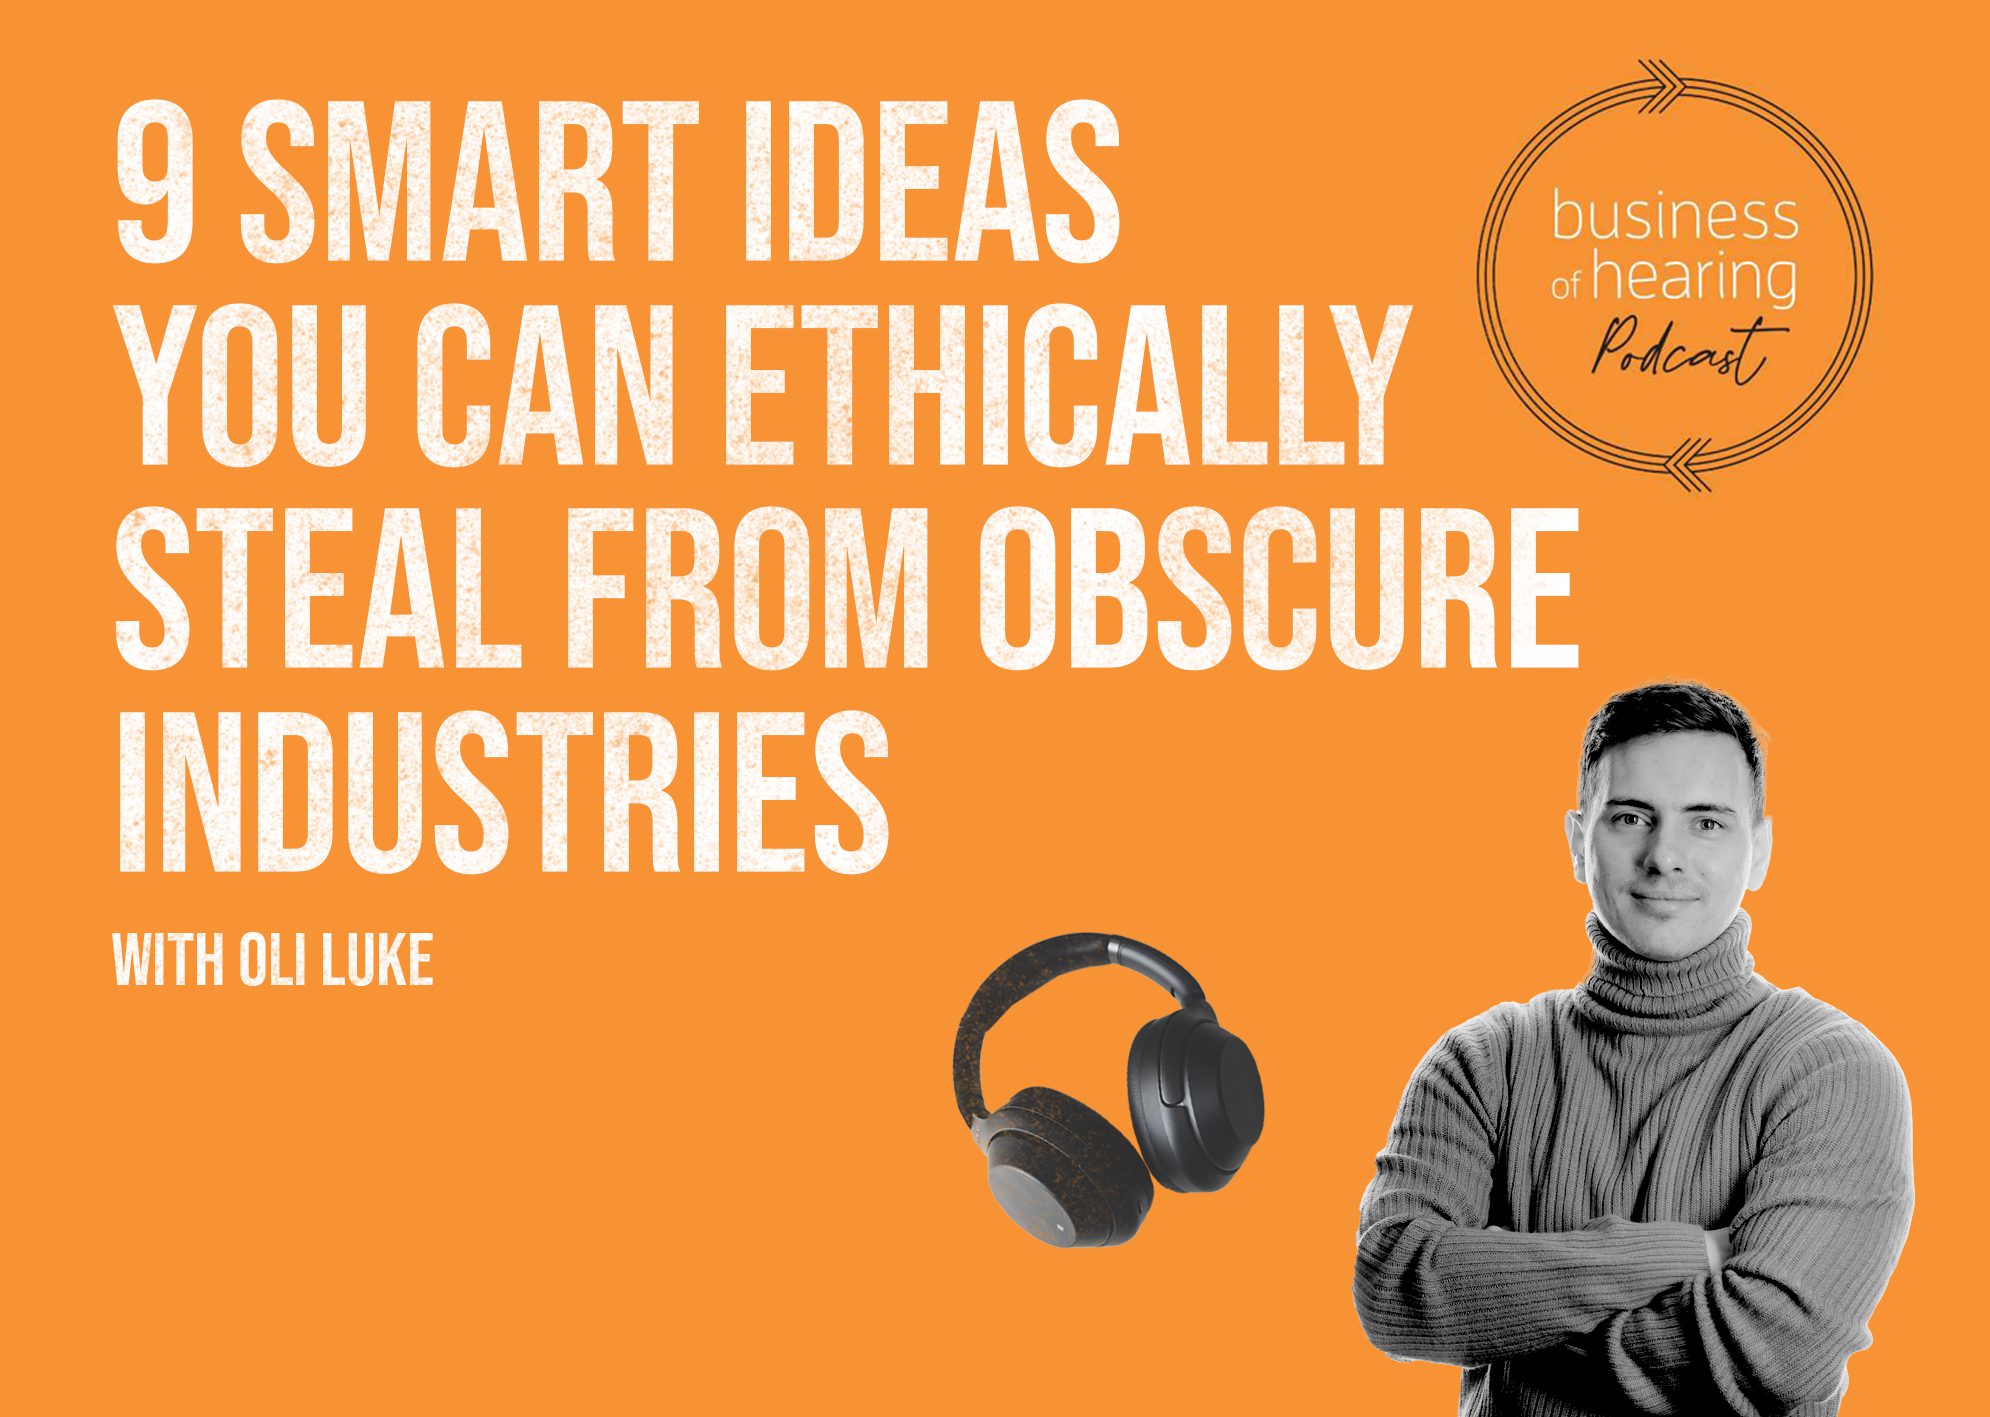 Podcast image of Oli Luke: 9 smart ideas you can ethically steal from obscure industries